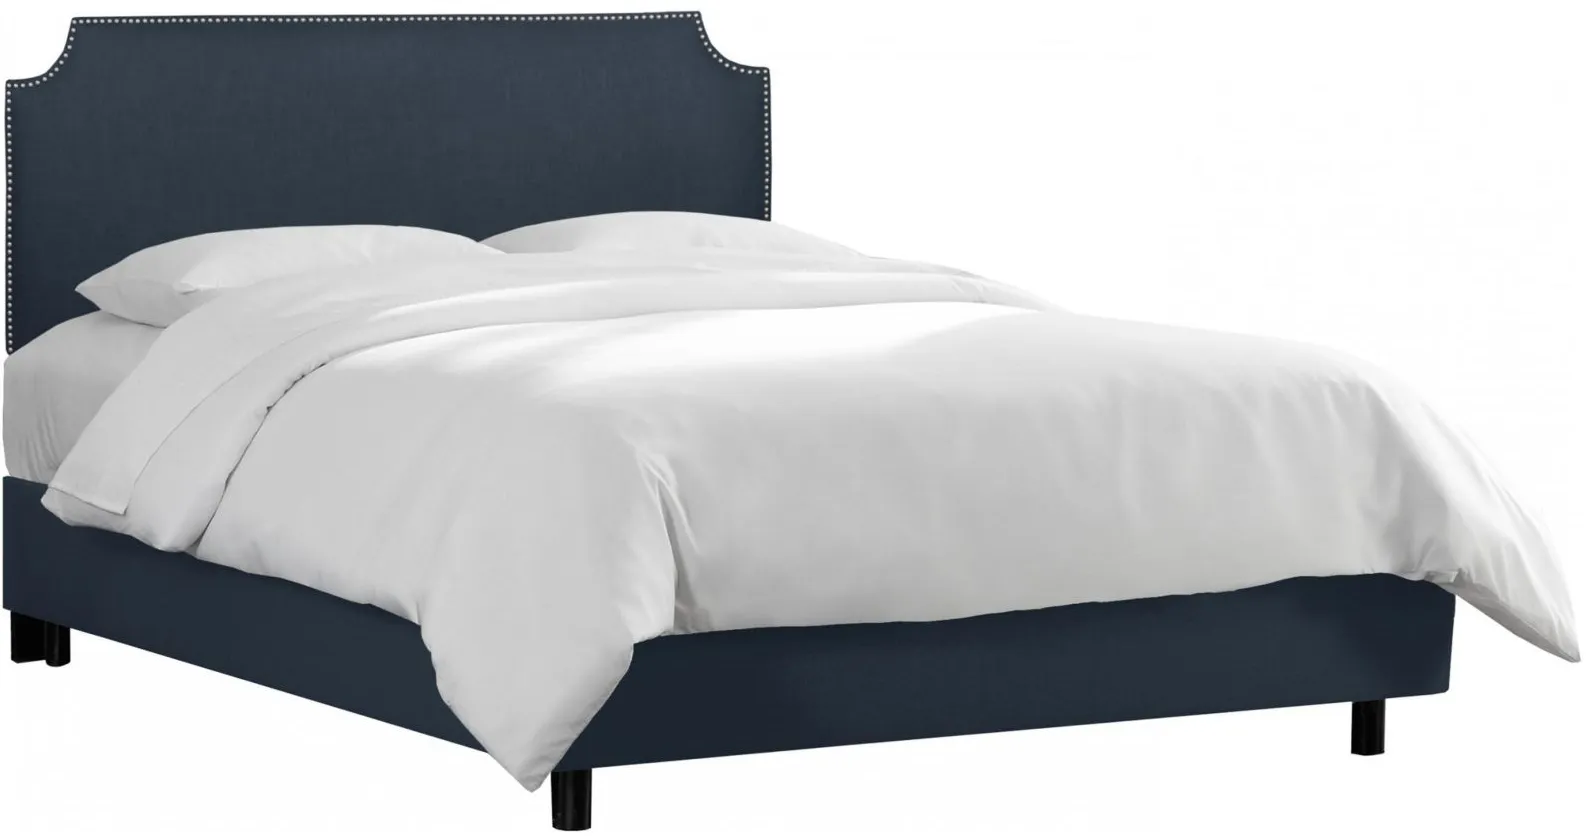 McGee Bed in Linen Navy by Skyline